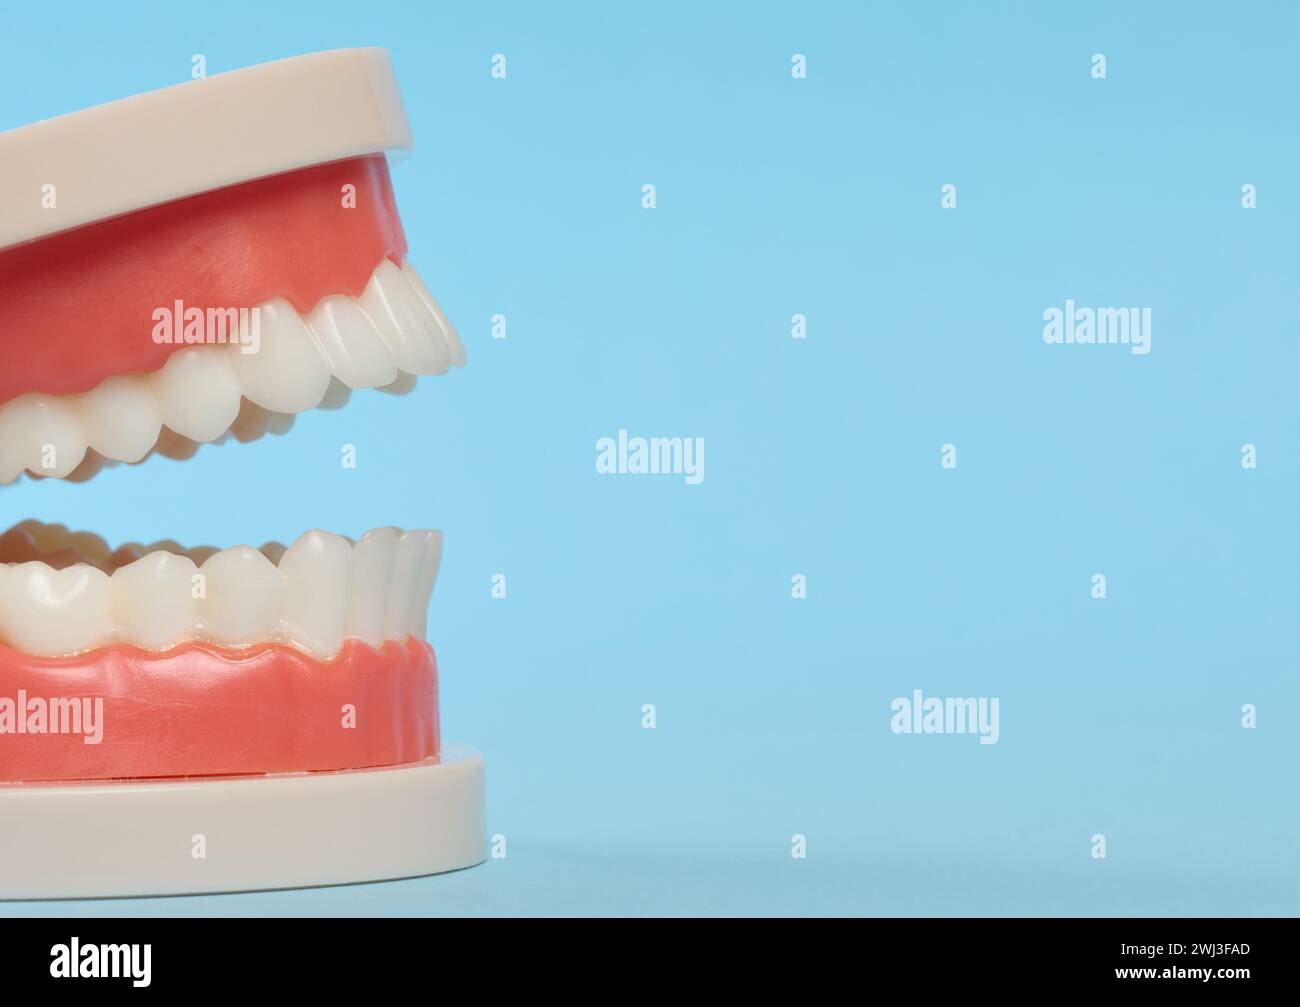 Plastic model of a human jaw with white teeth on a blue background Stock Photo